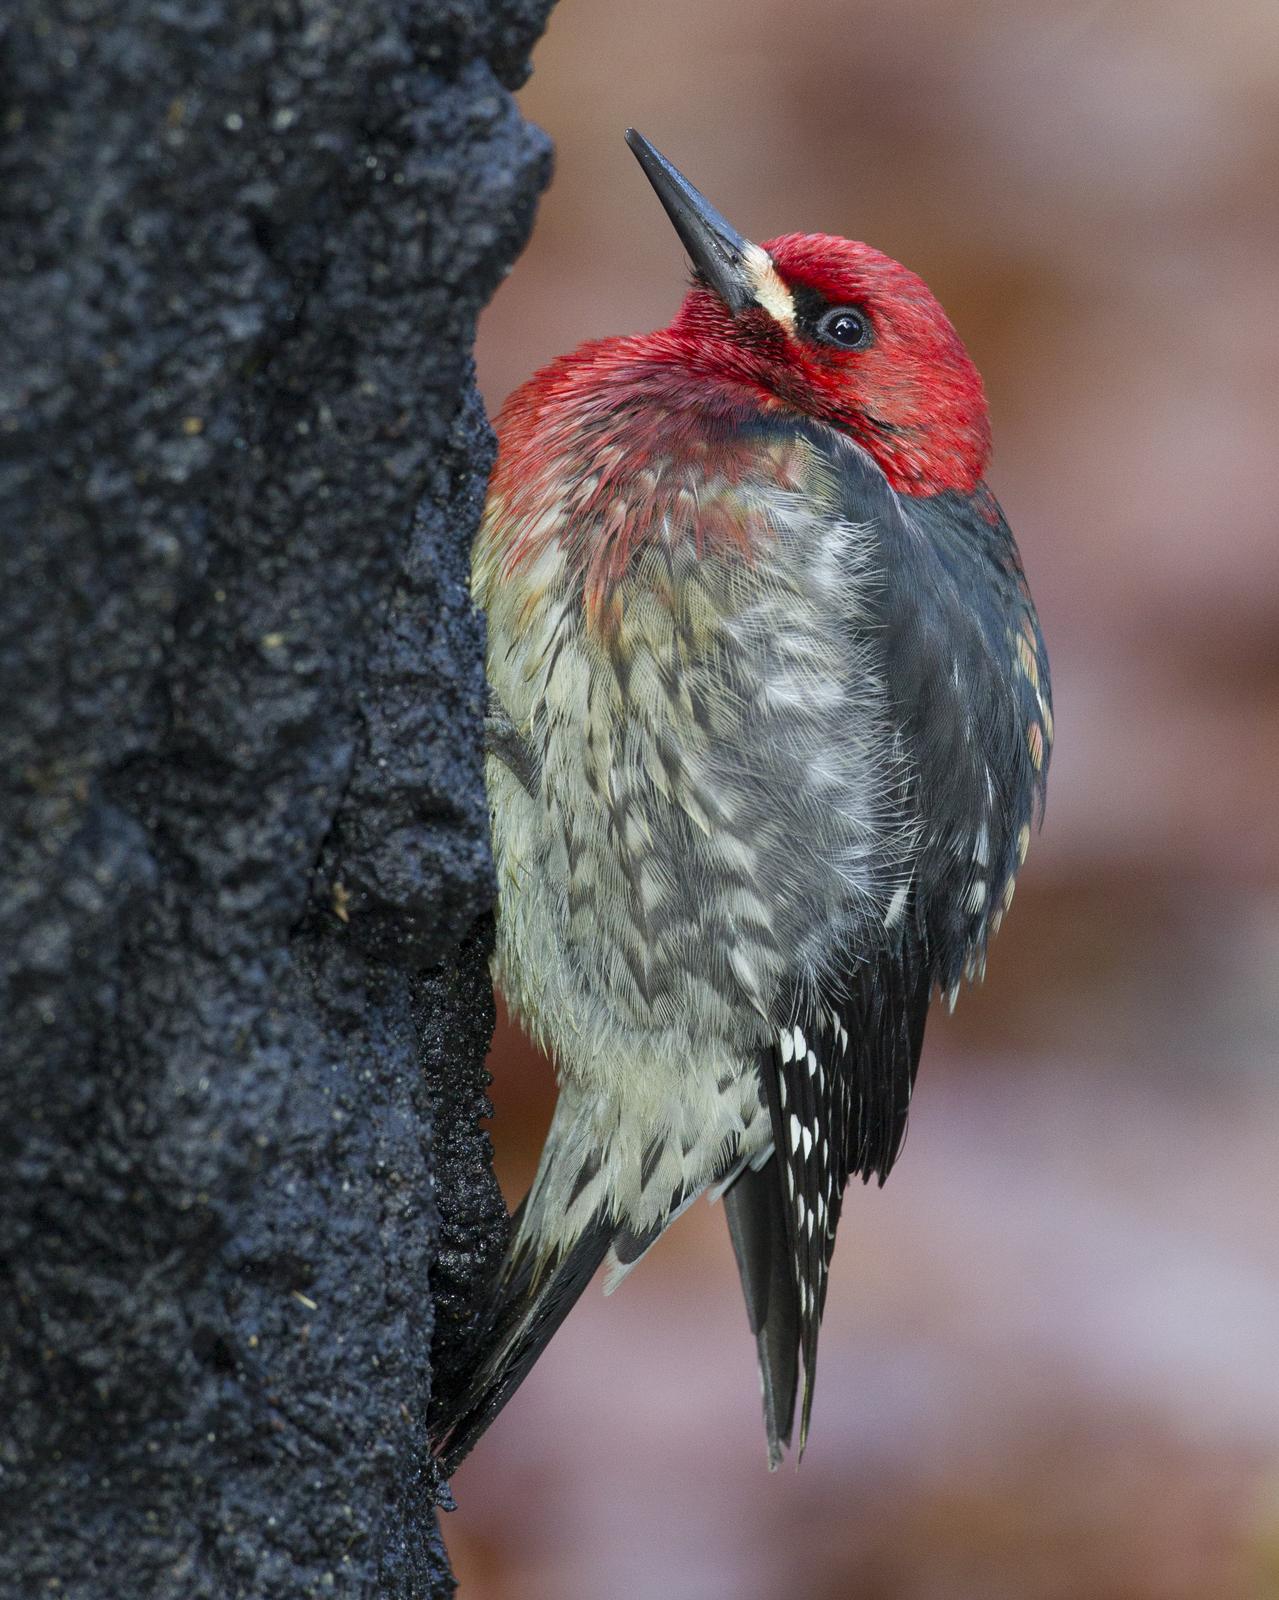 Red-breasted Sapsucker Photo by Jeff Moore